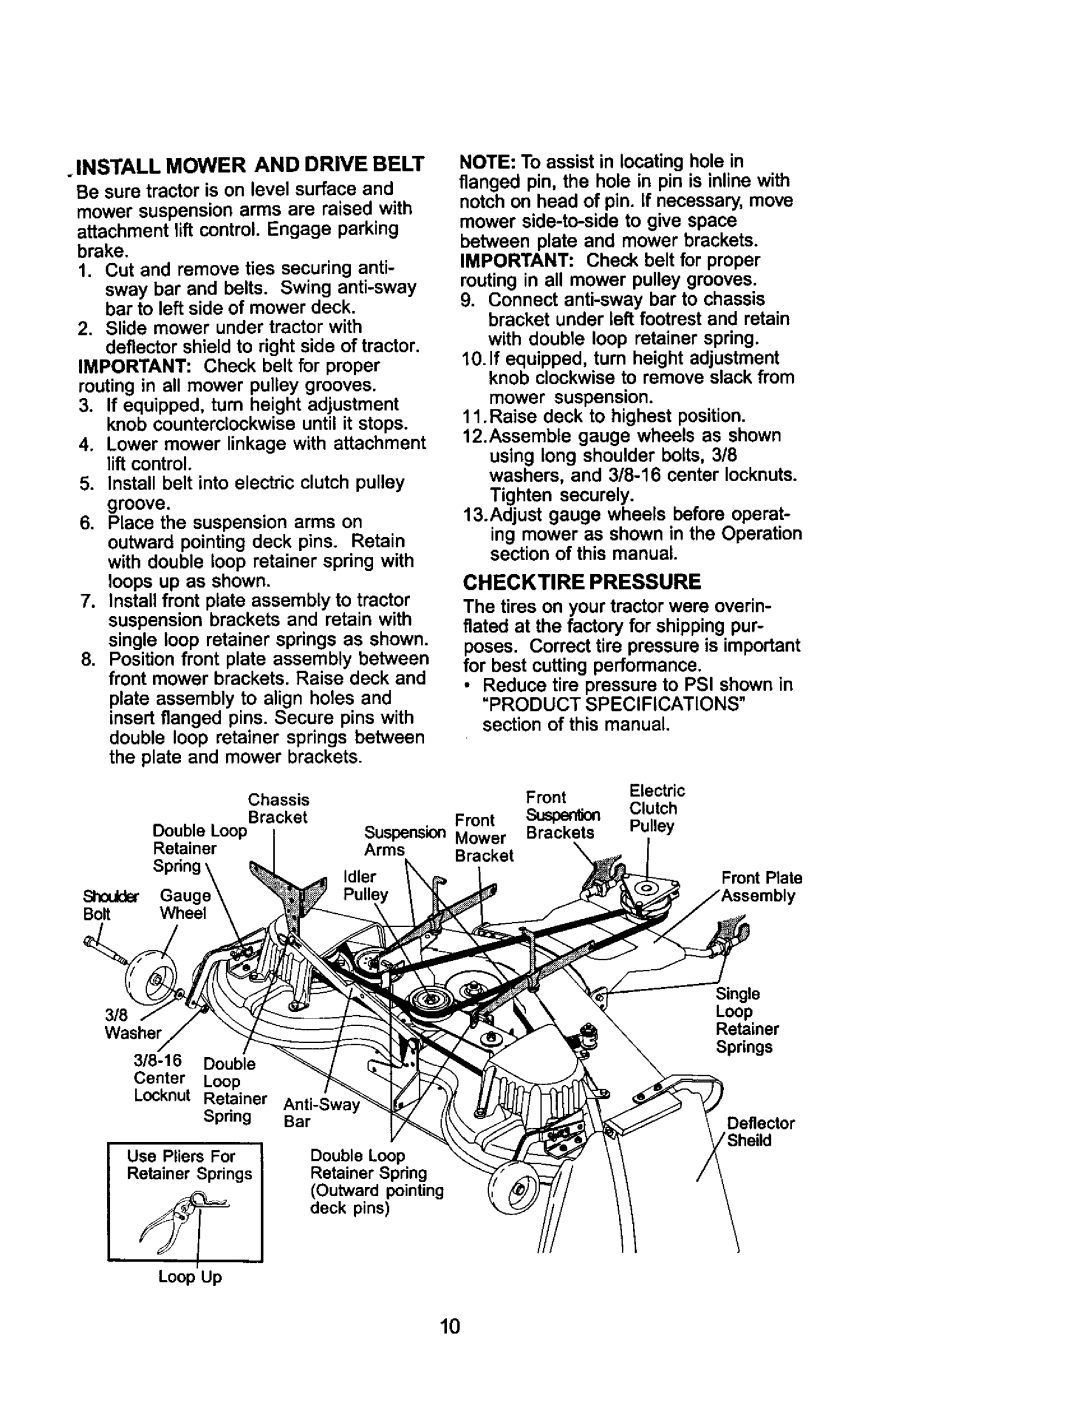 Craftsman 917.275031 owner manual Install Mower And Drive Belt, Sheild 